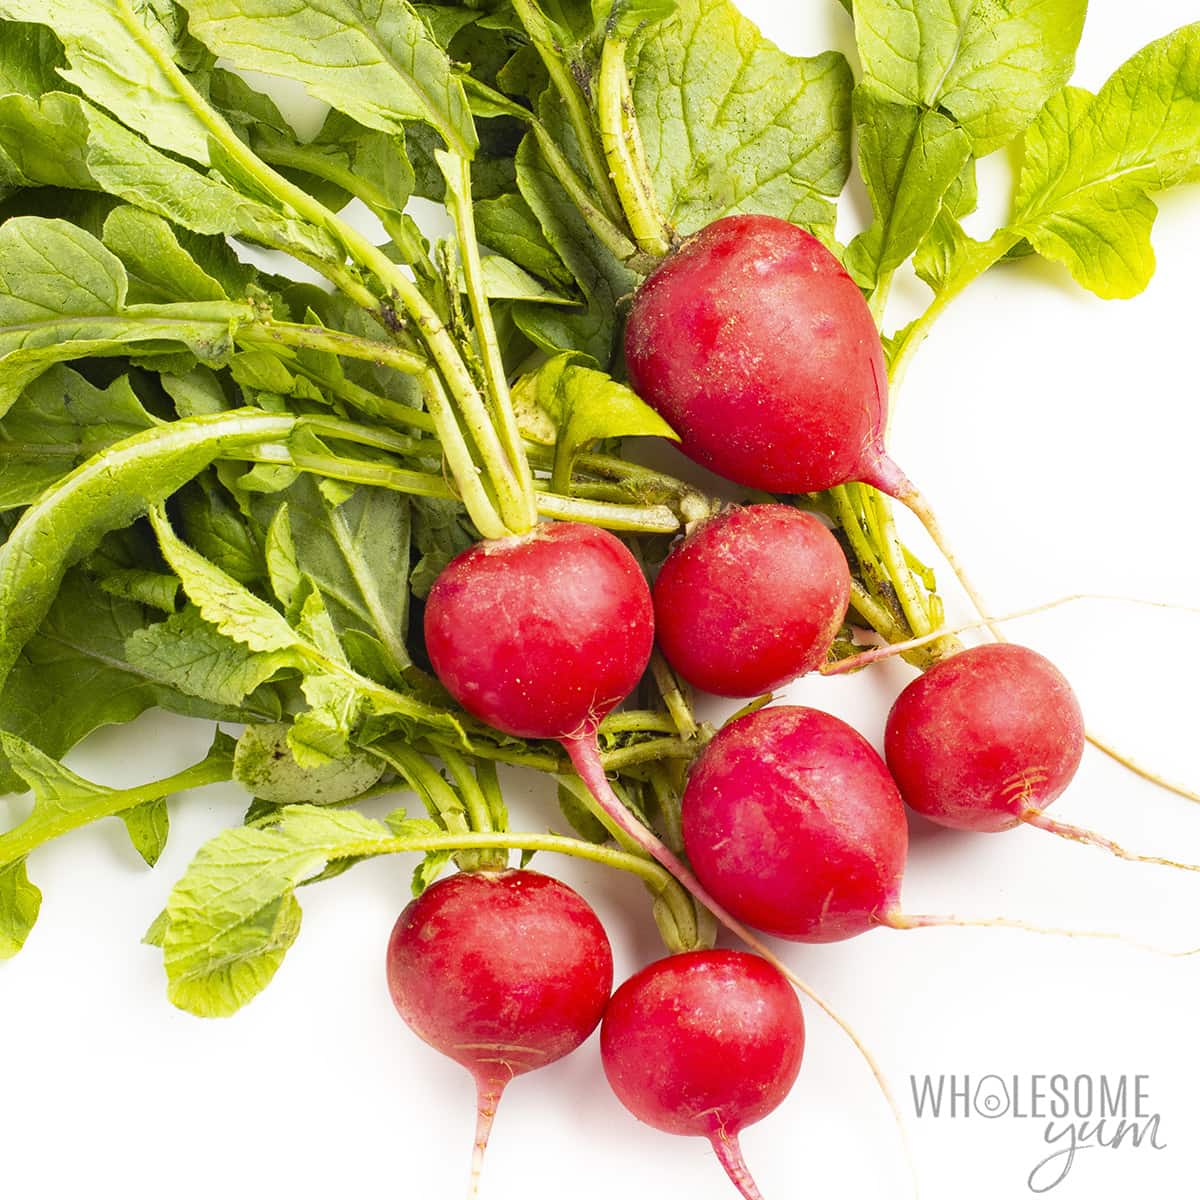 Bunch of radishes that are keto friendly